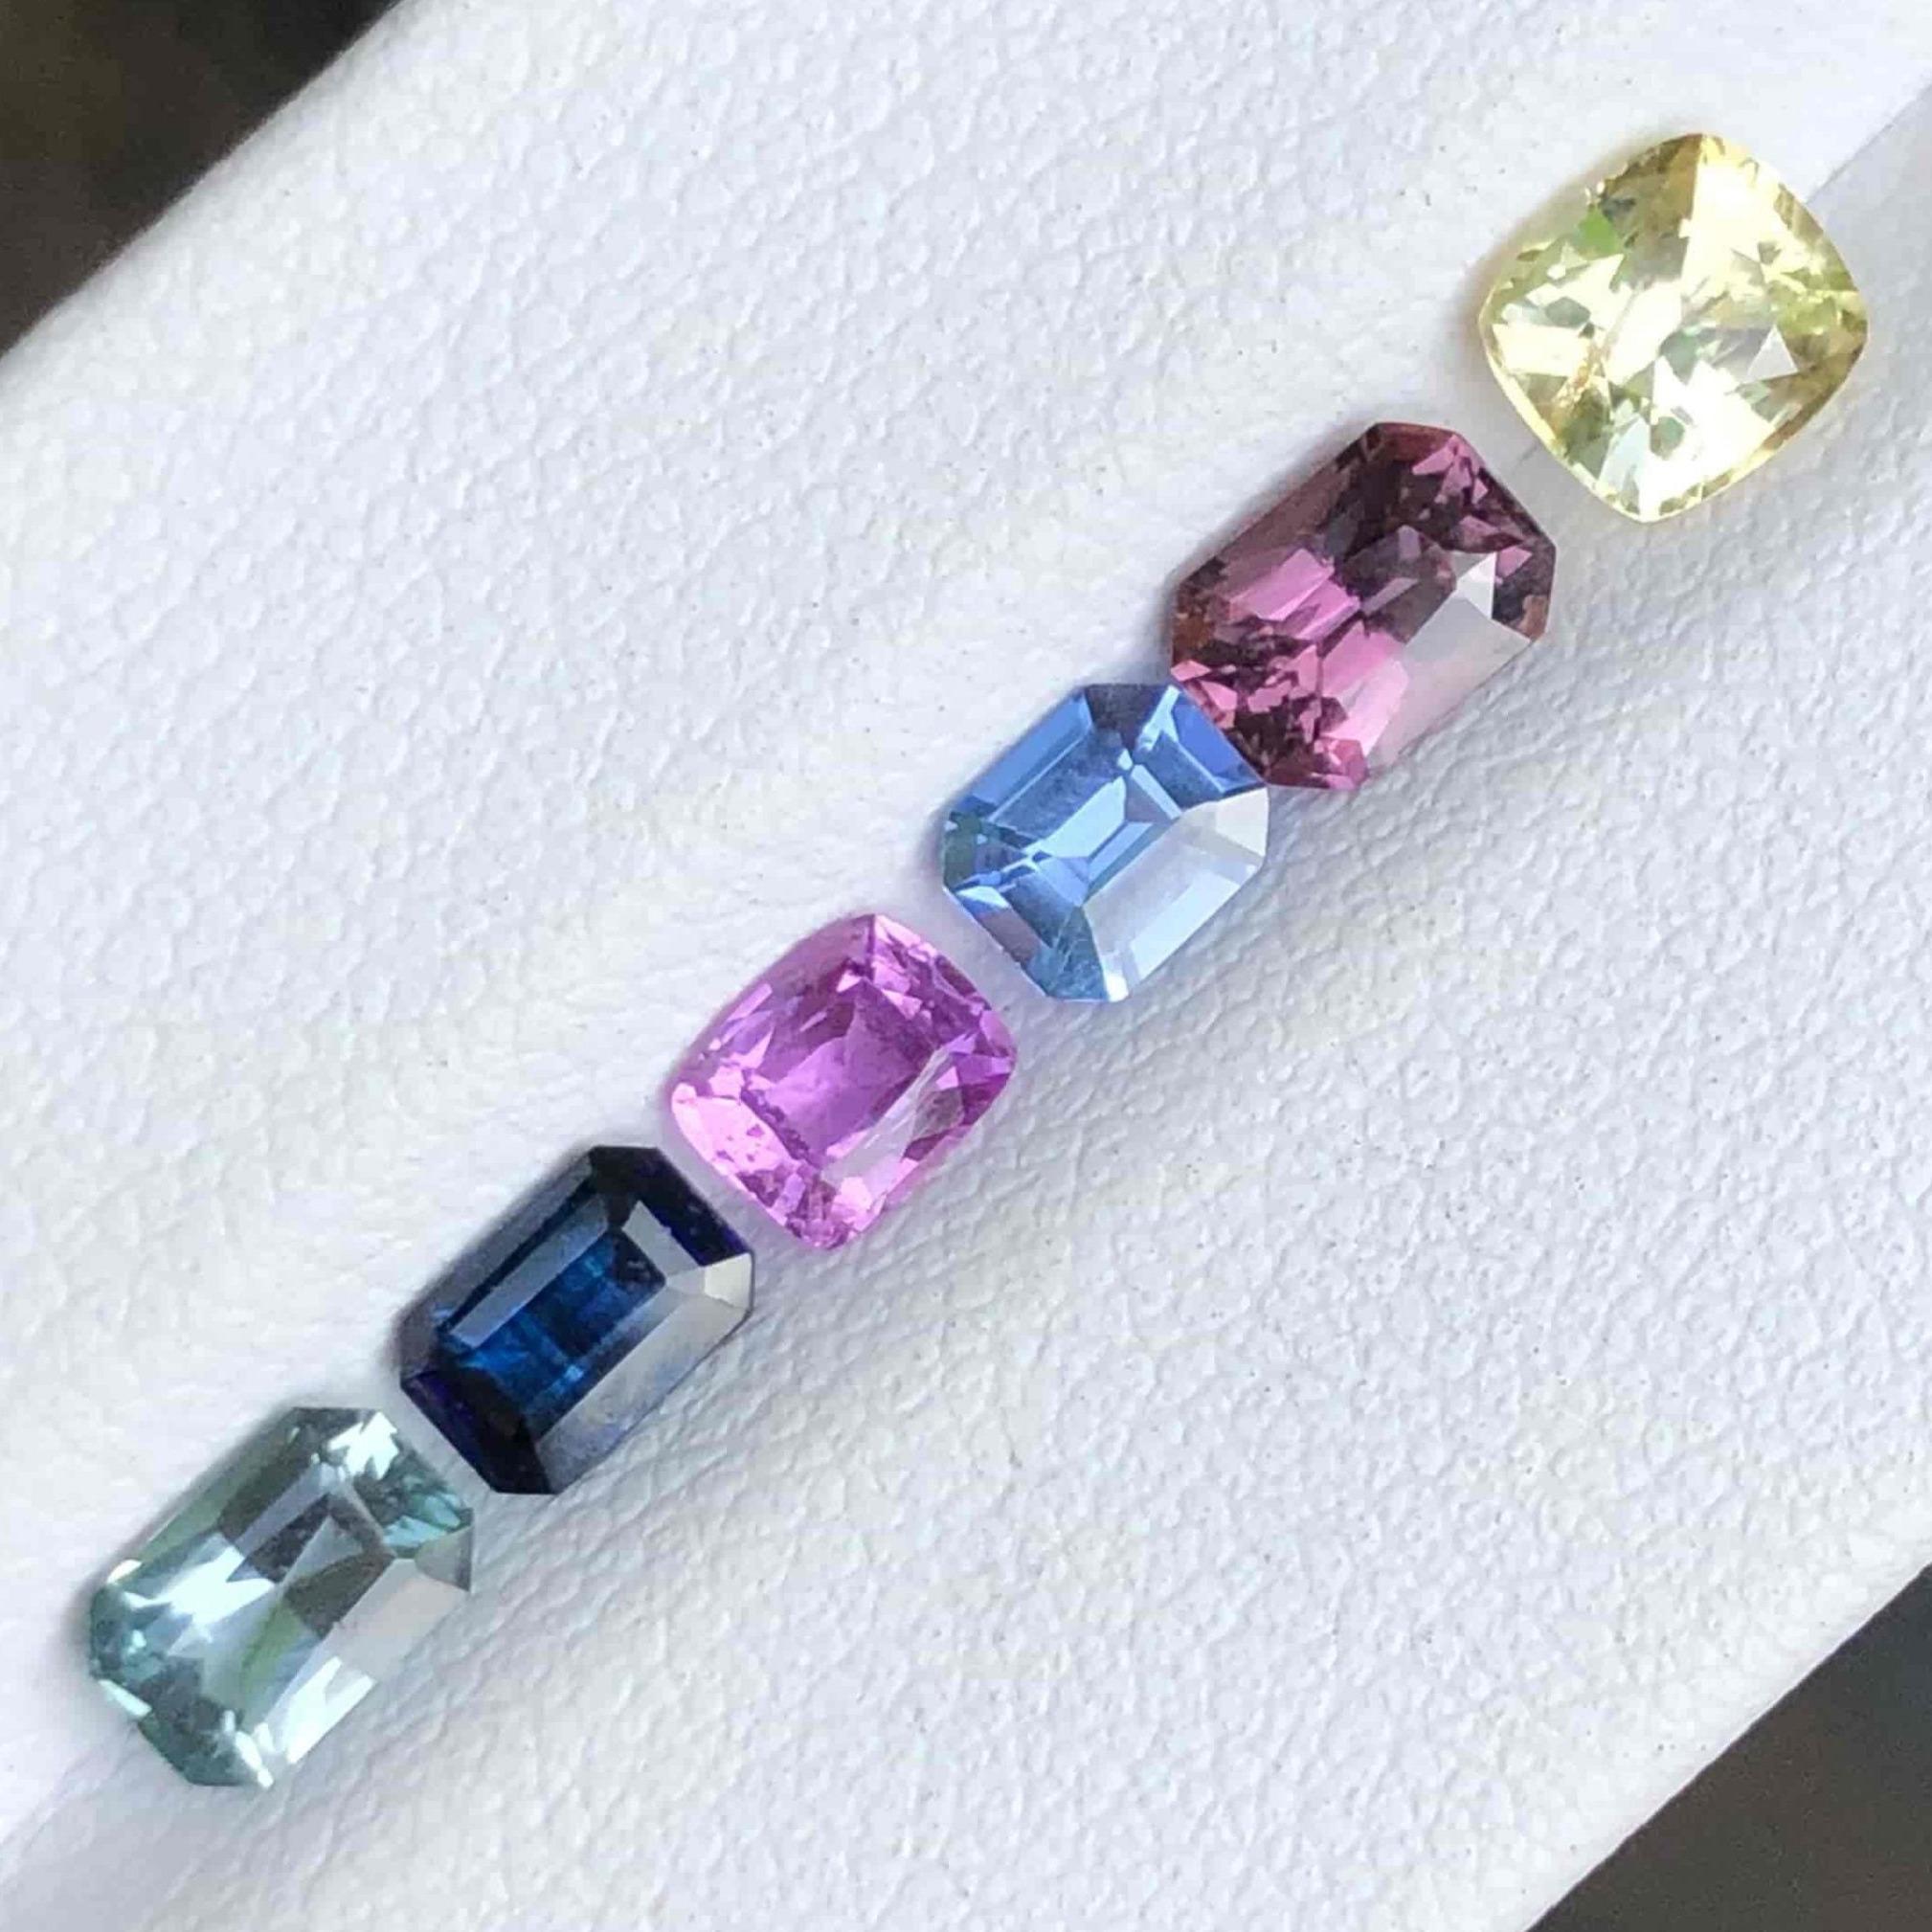 Gemstone Type Multiple Colors Sapphire Lot
Weight 3.50 carats
Average Weight 0.75, 0.70, 0.55, 0.55, 0.45, 0.45 carats
Clarity VVS to Loupe Clean
Origin Sri Lanka
Treatment None




Introducing a captivating assortment of natural gemstones, we